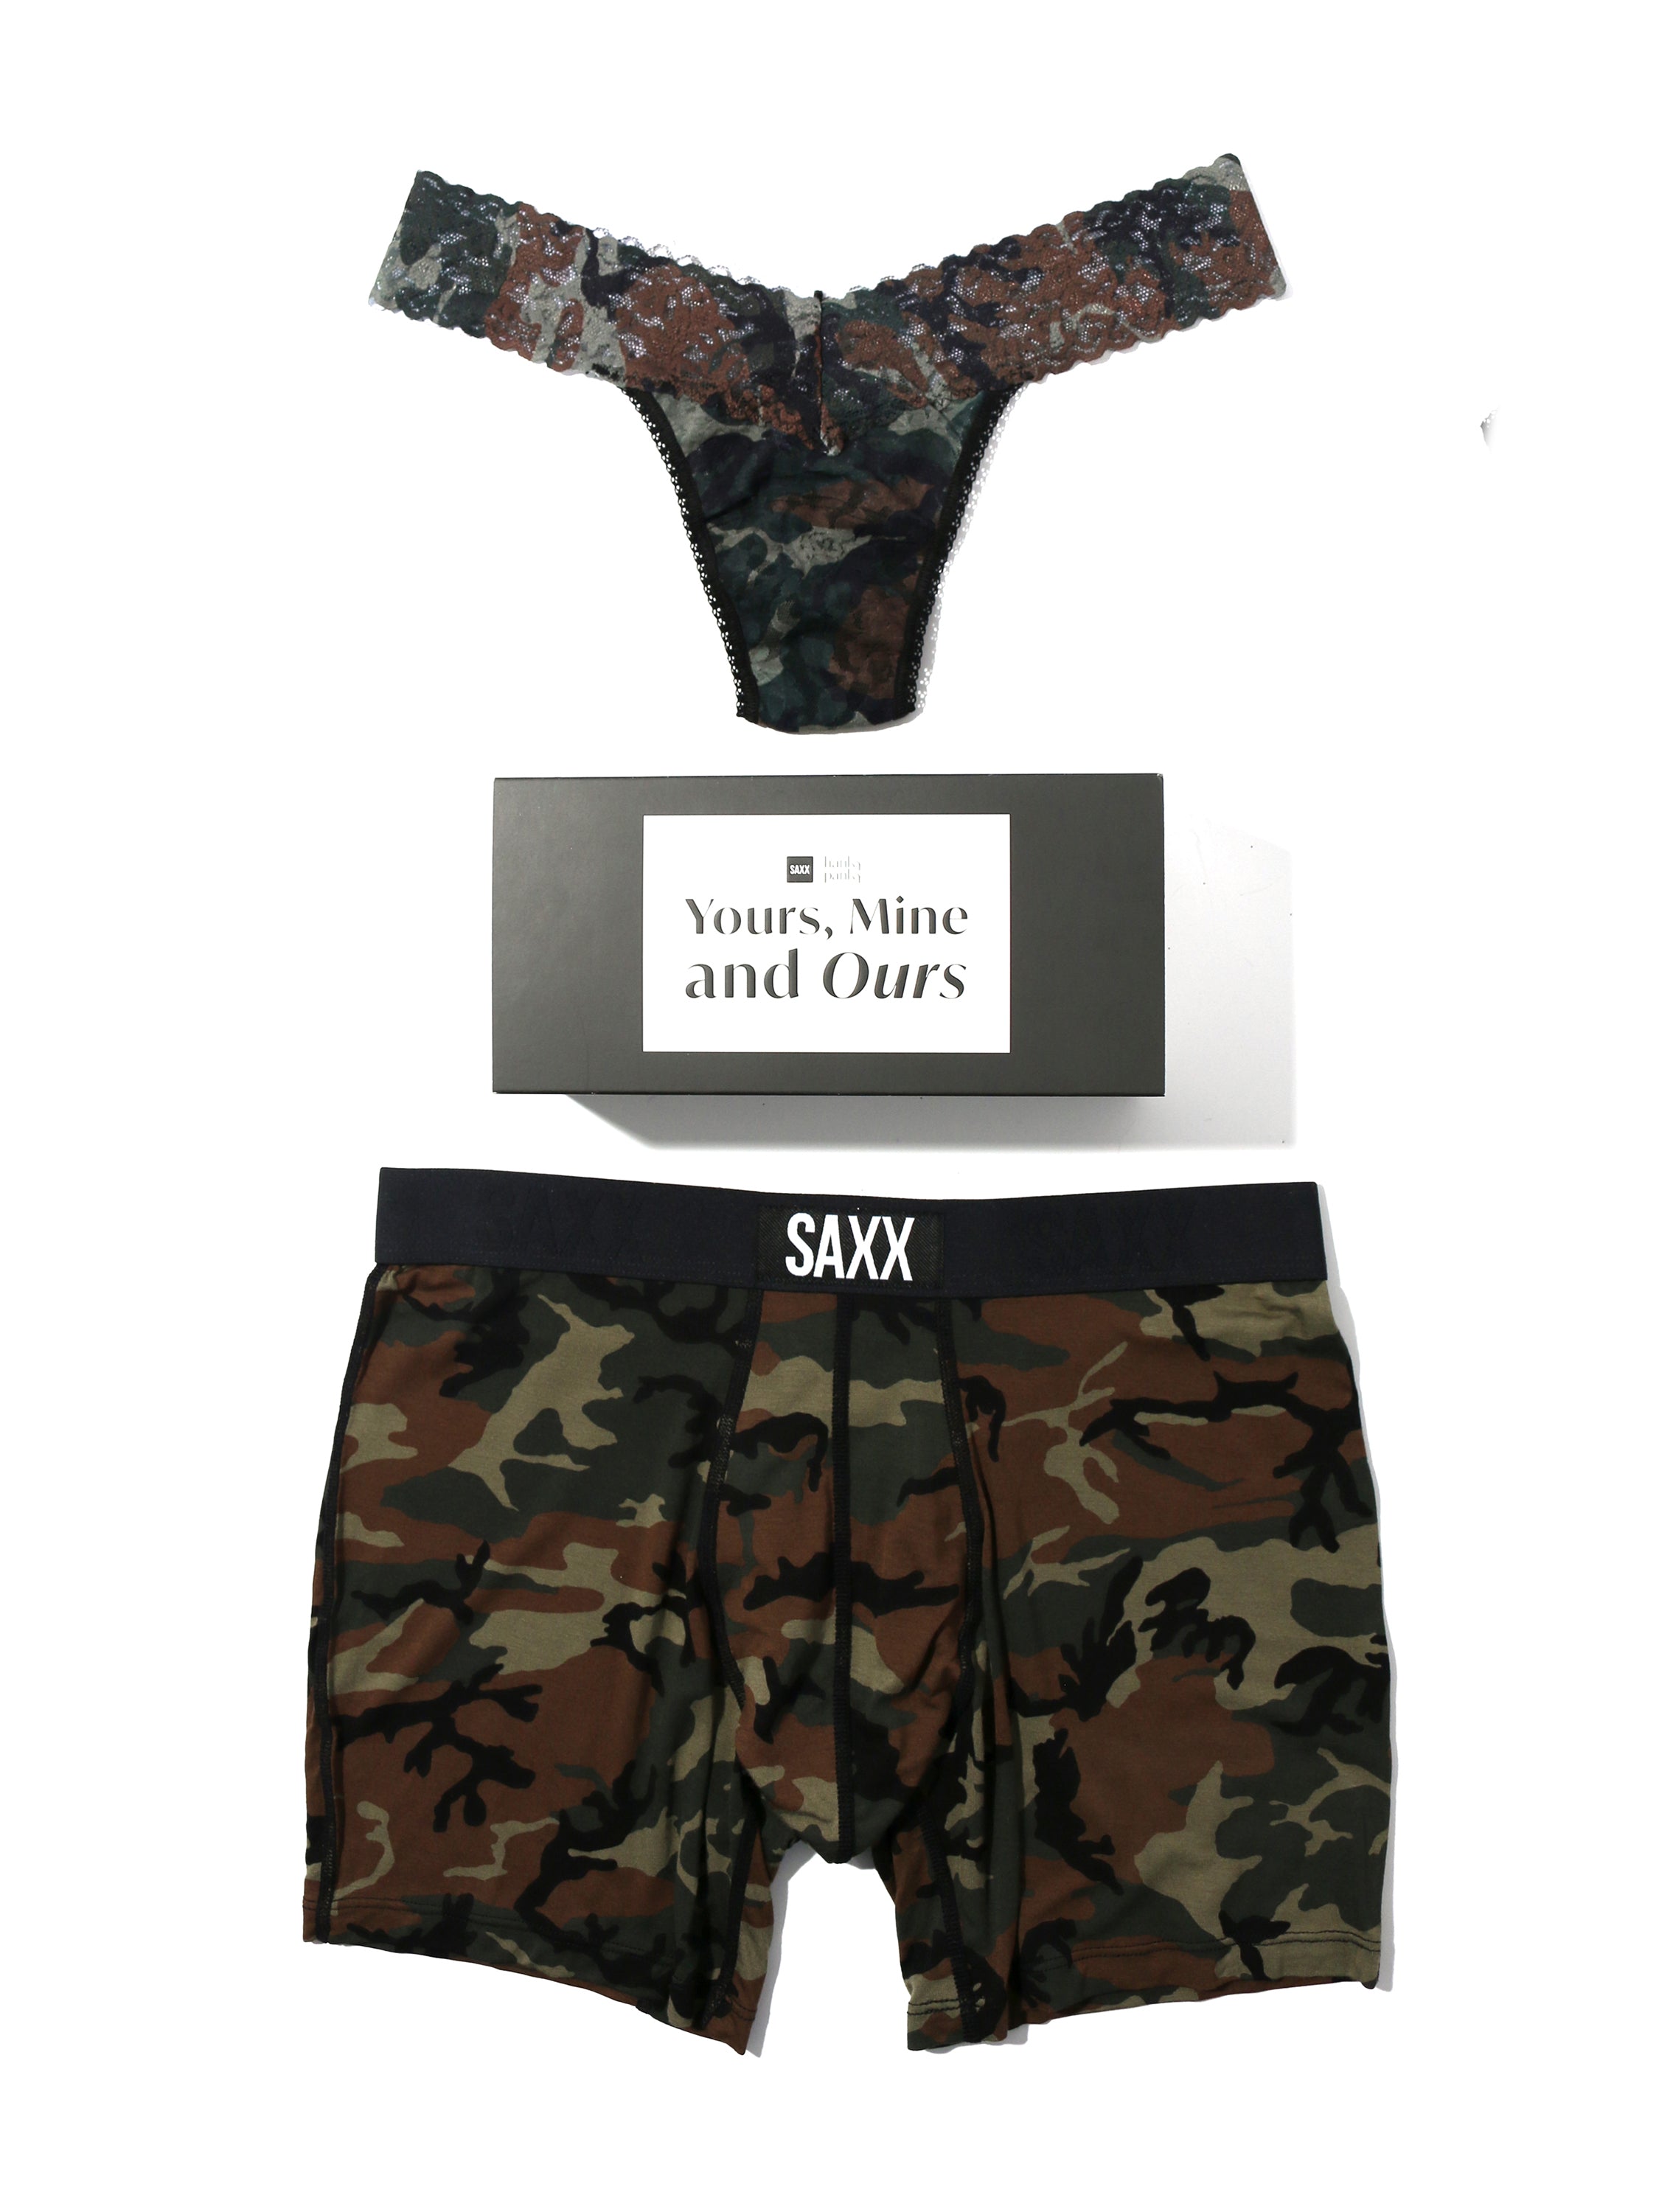 Naked North PInk Camo Camouflage Bra Lingerie